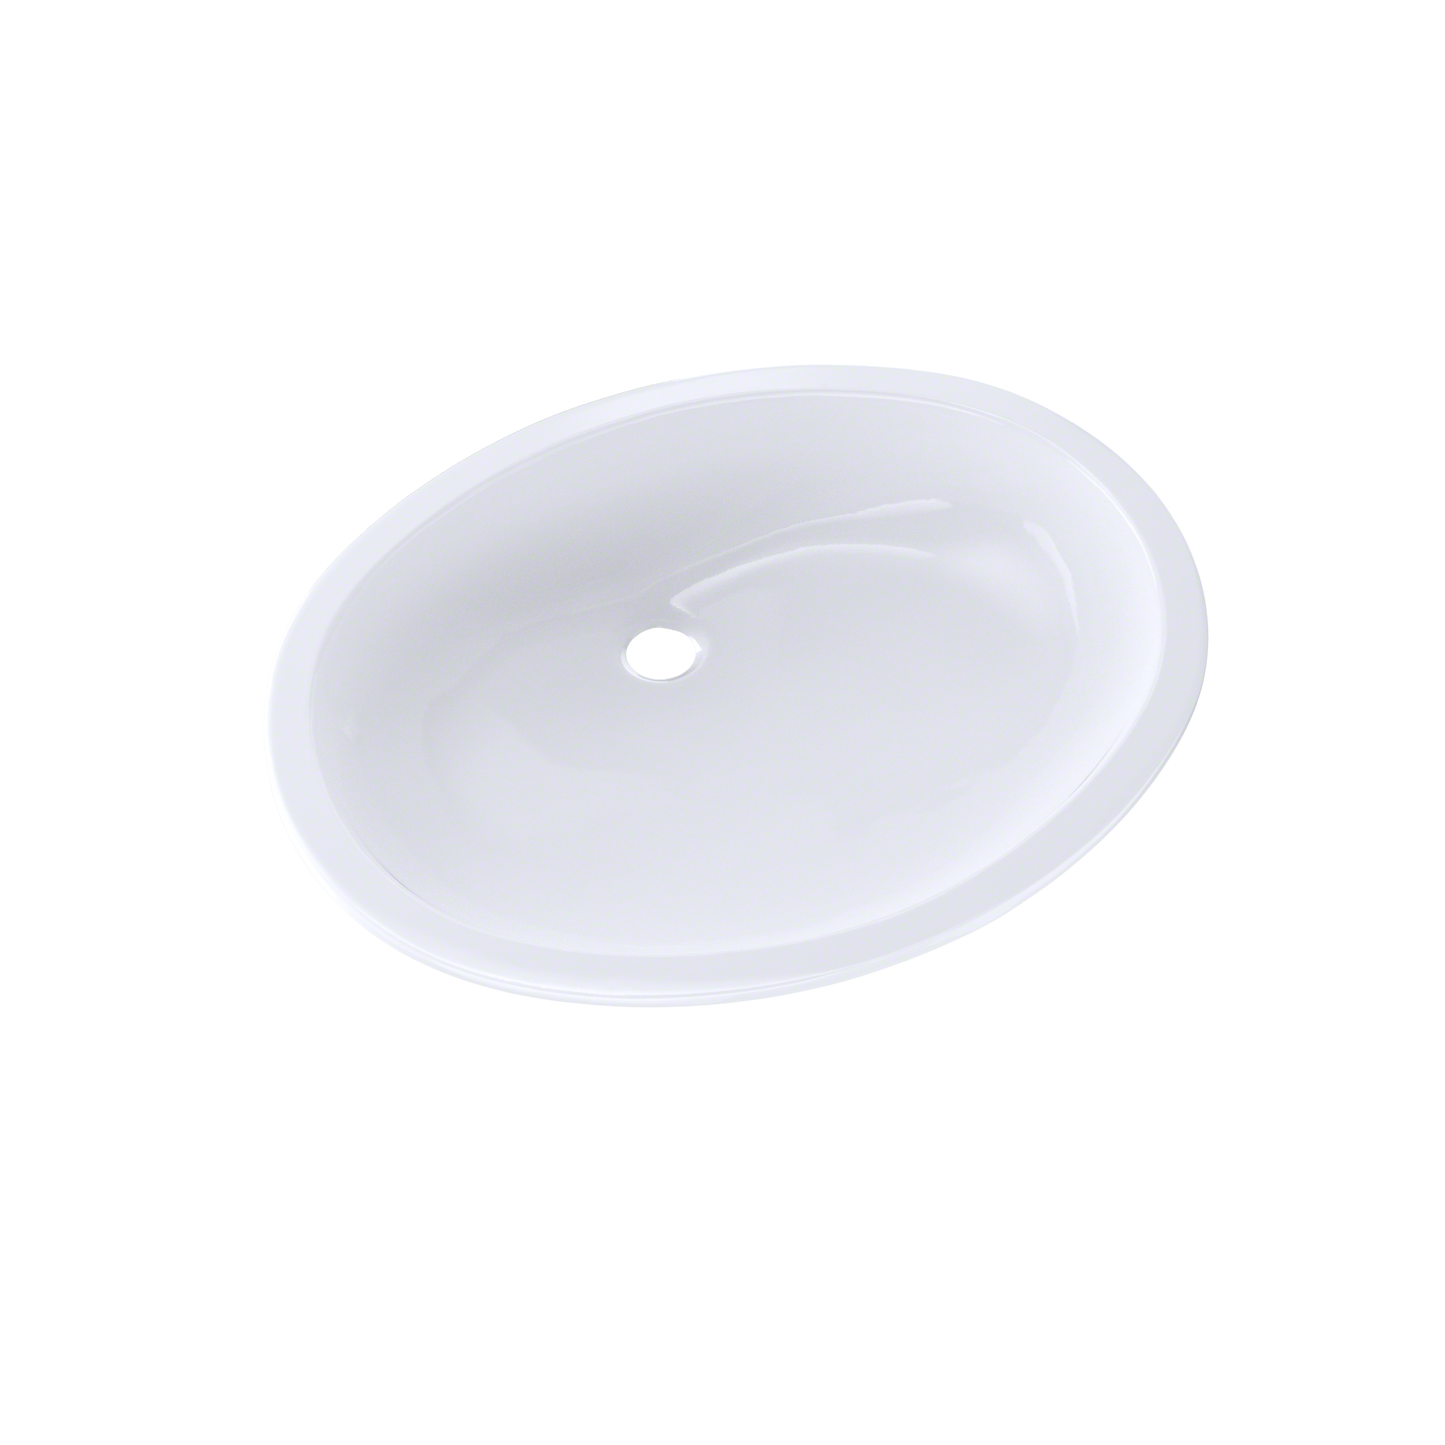 Toto LT597G#01 - Dantesca Undermount Bathroom Sink with Overflow and CeFiONtect Ceramic Glaze- Cotto